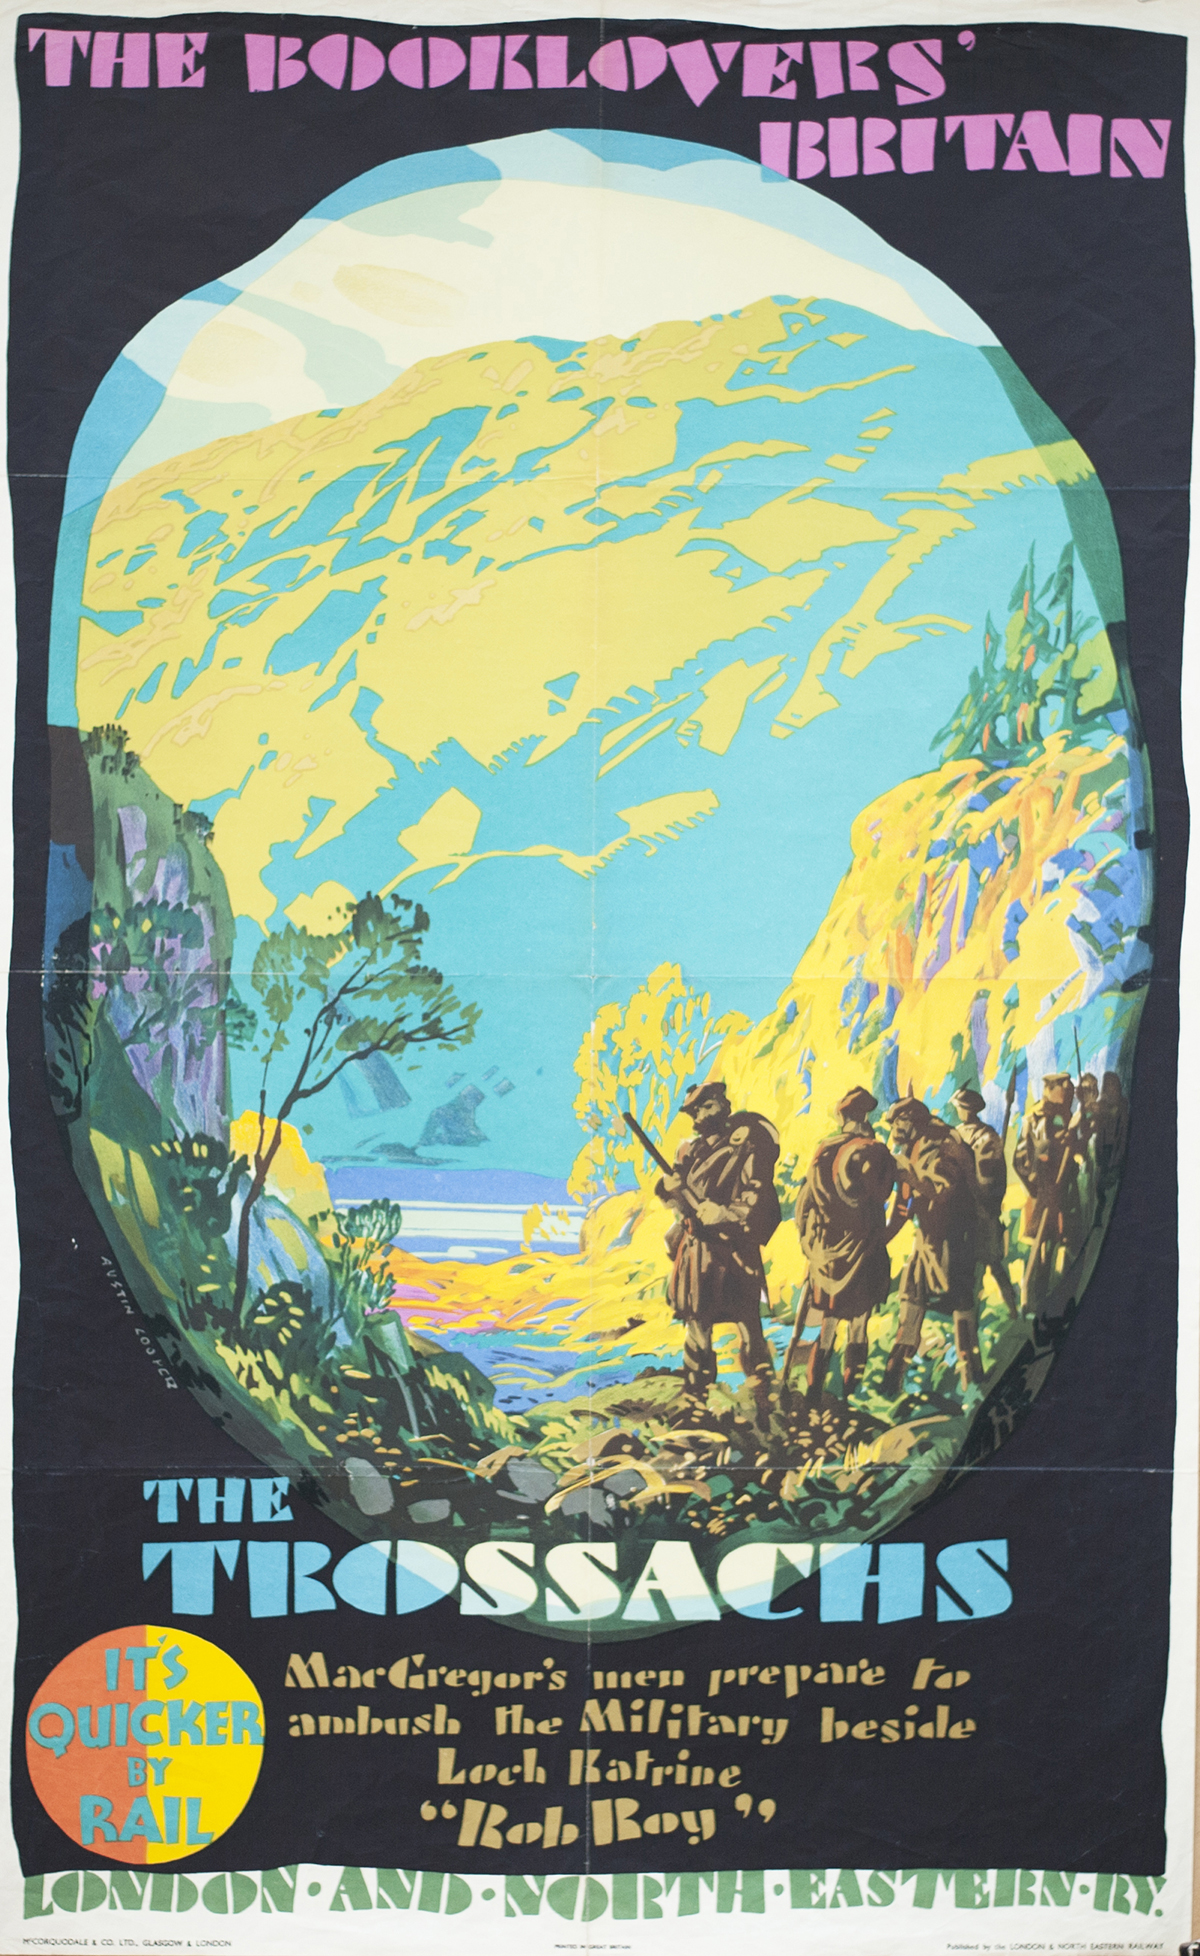 Poster LNER THE BOOKLOVERS BRITAIN THE TROSSACHS by AUSTIN COOPER circa 1930. Double Royal 25in x